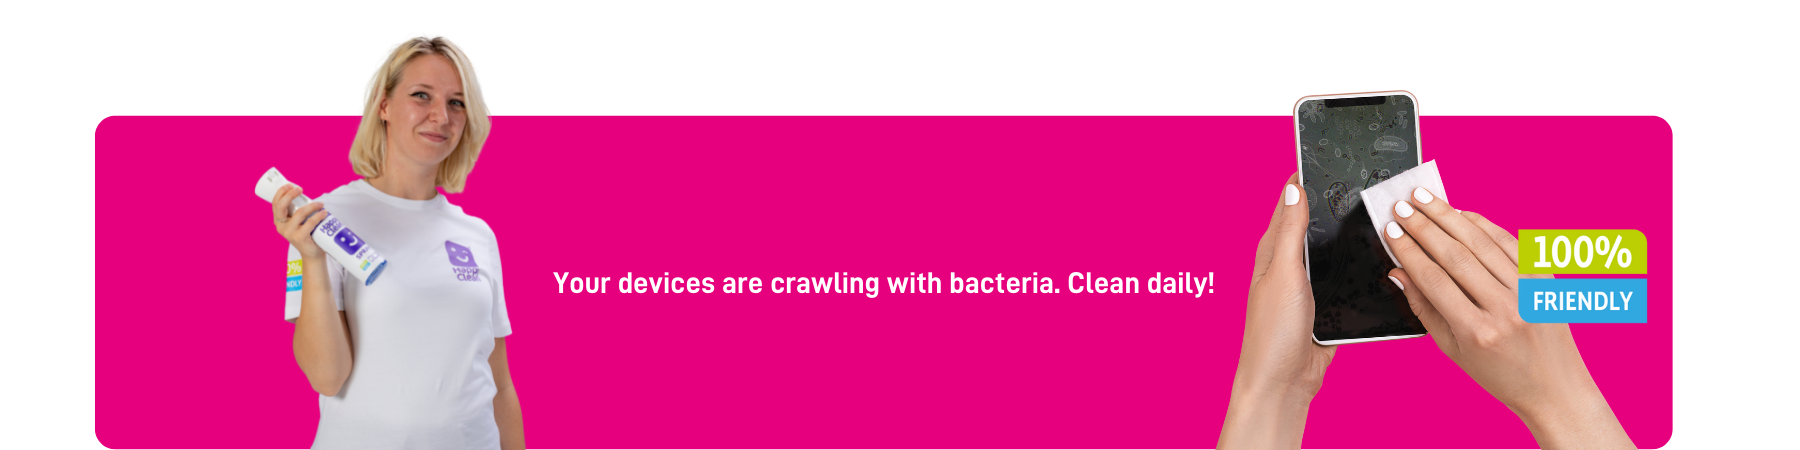 Your devices are crawling with bacteria. Clean daily! (2)